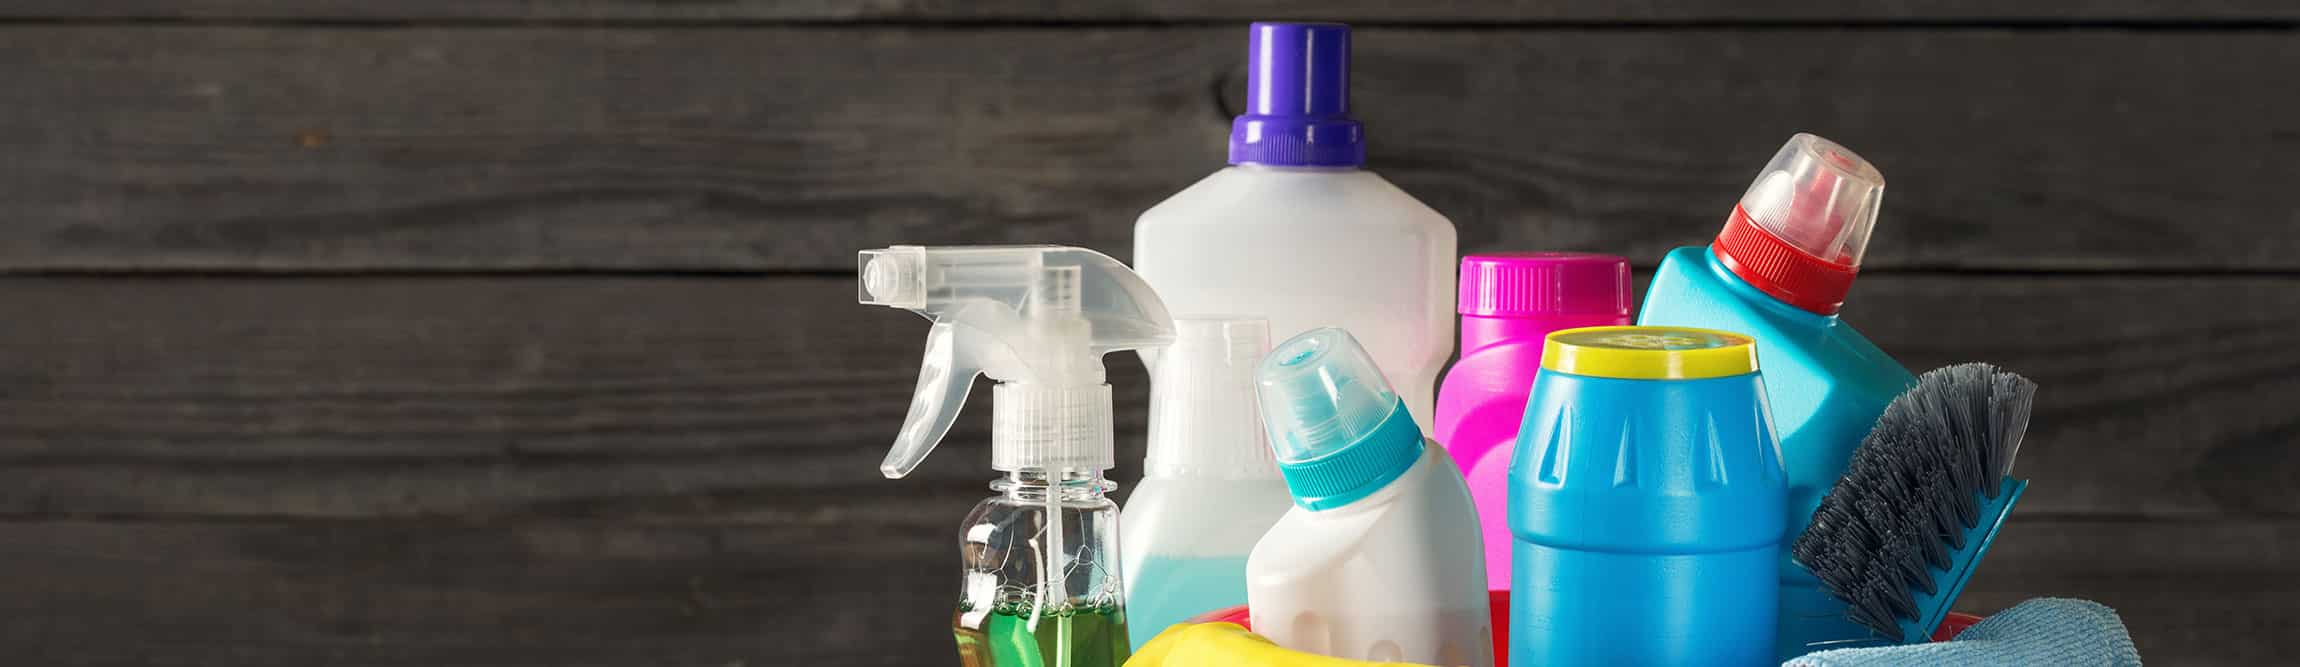 cleaning and bleach products